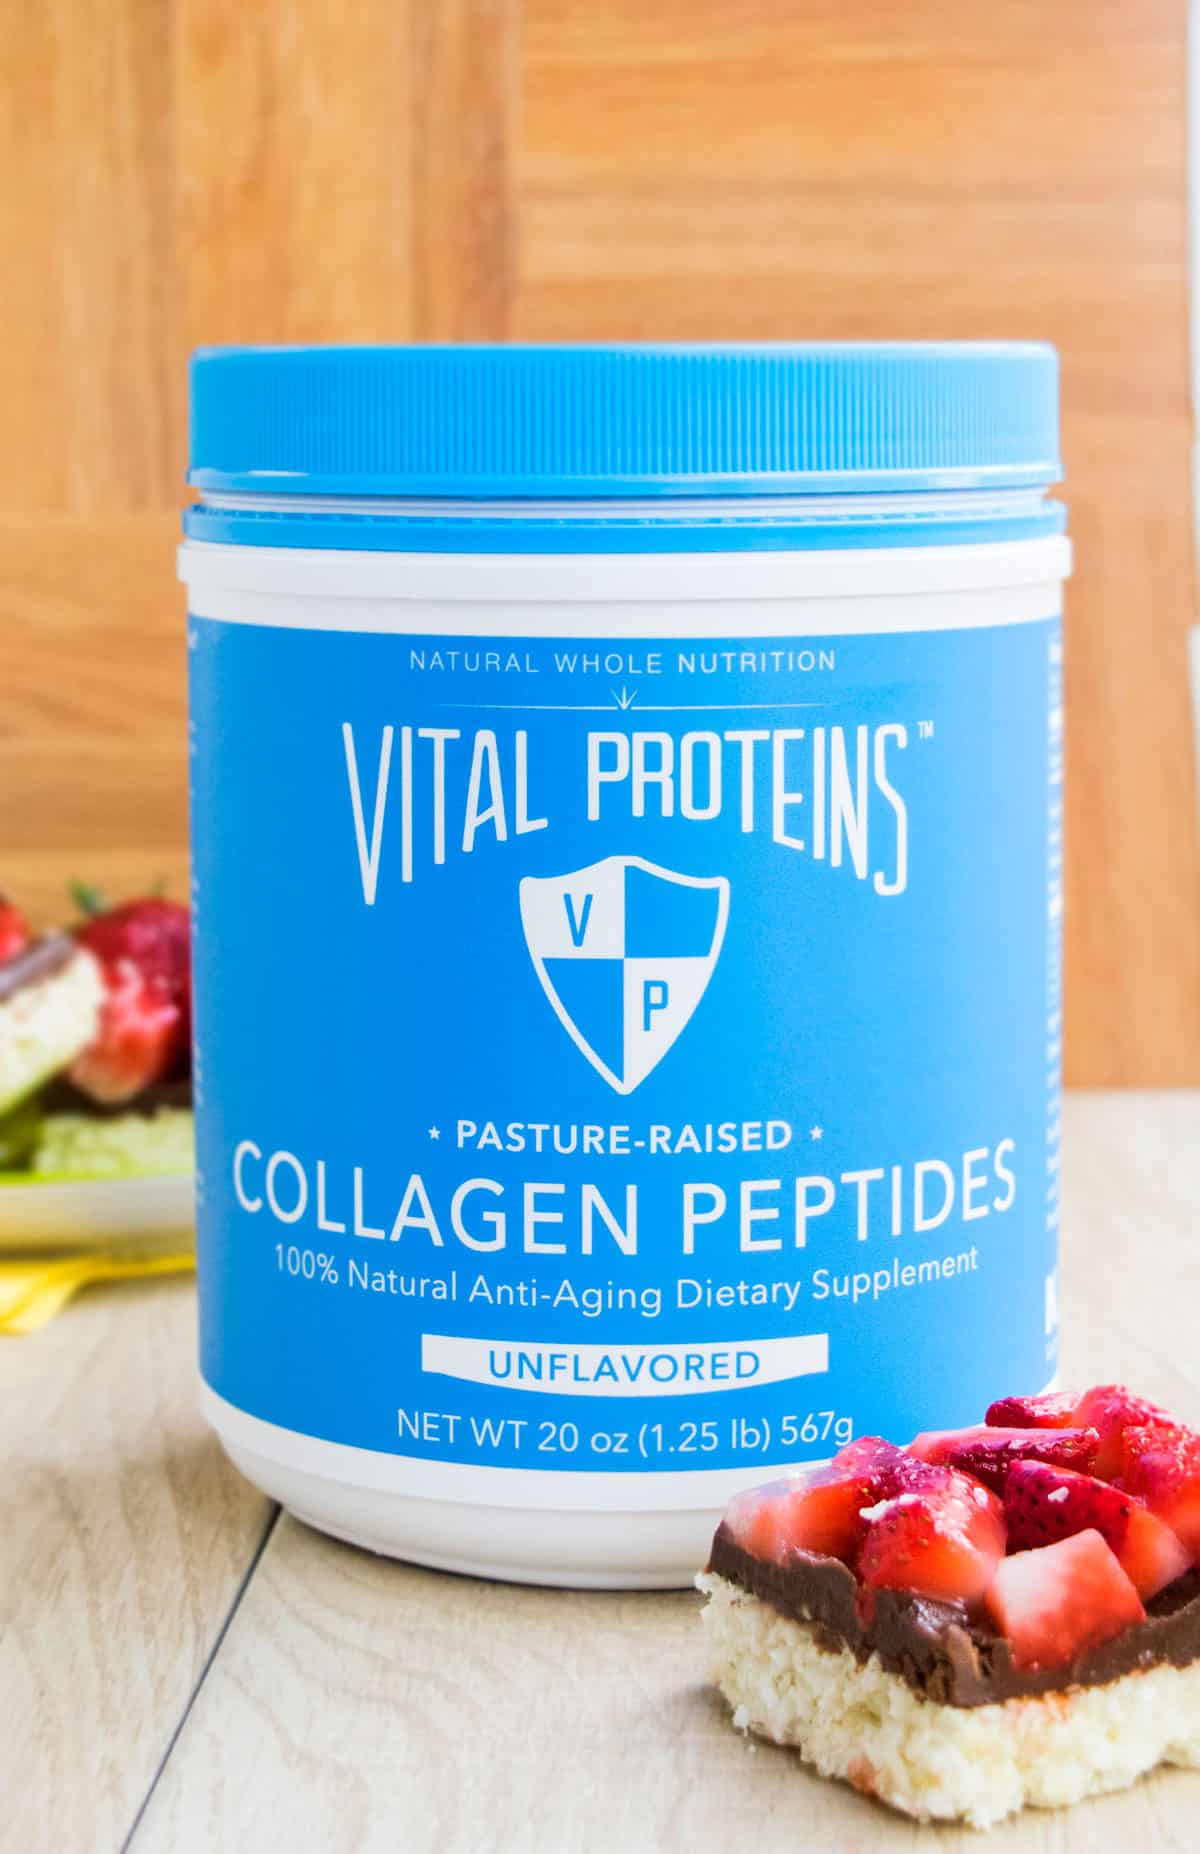 Can of Vital Proteins Collagen Peptides